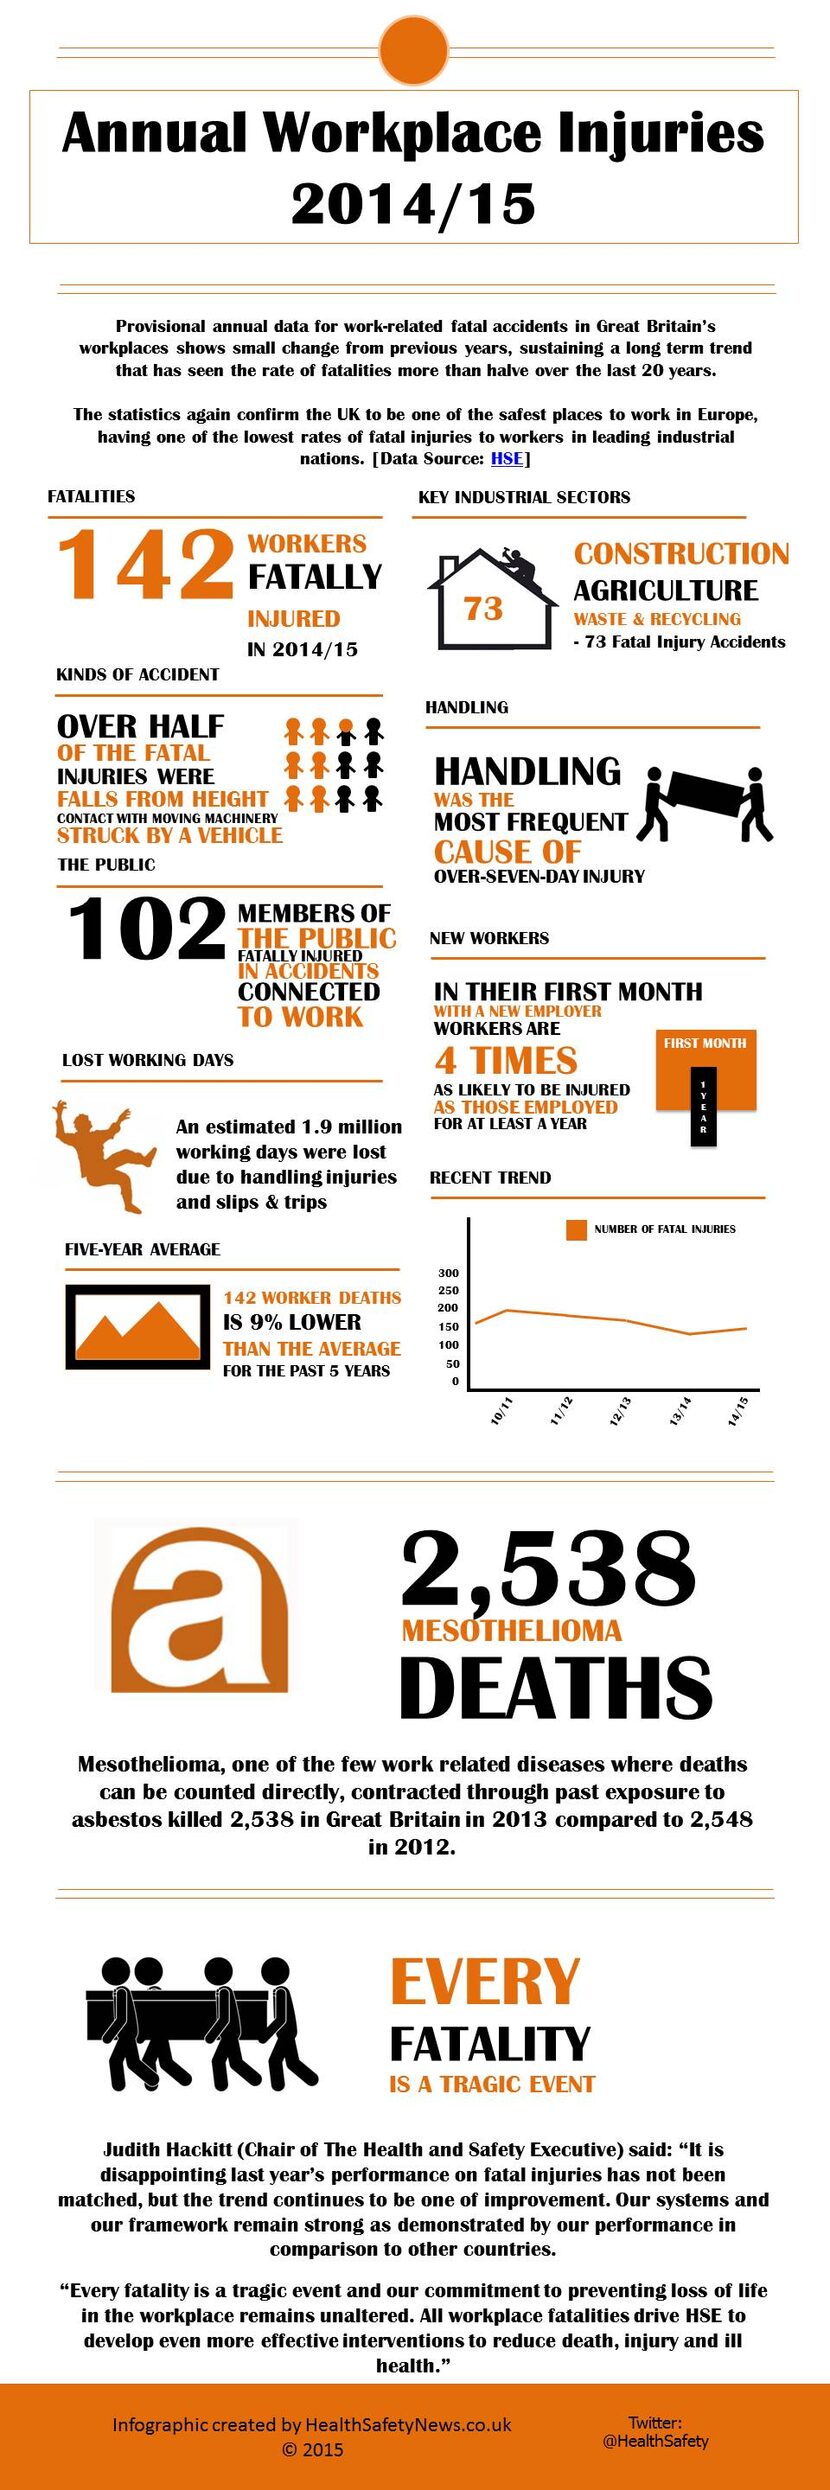 safety and health infographic showing annual workplace injury statistics for 2014/15